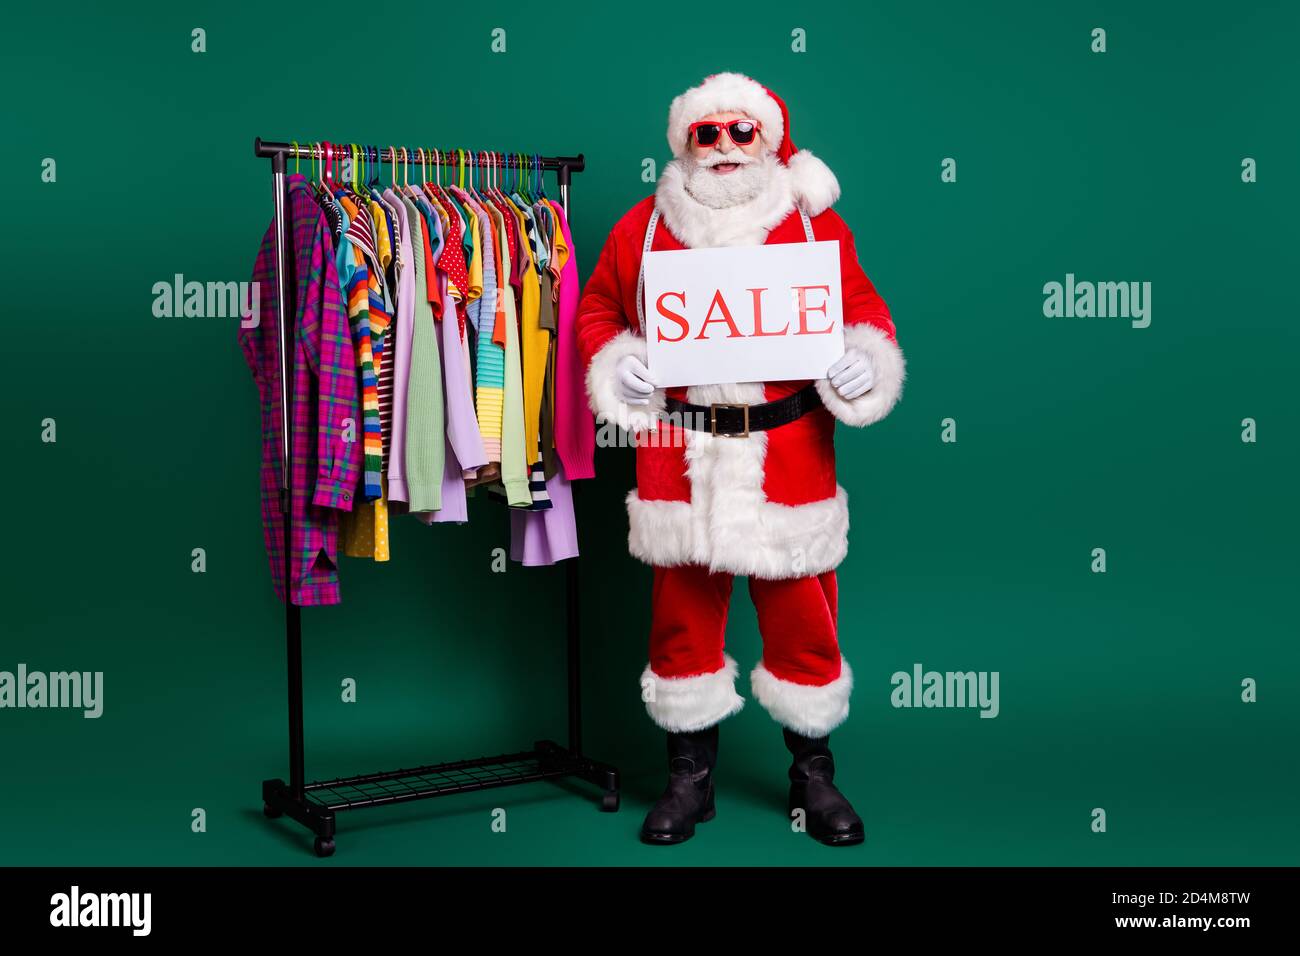 Full length body size view of his he nice fat funny cheerful bearded glad Santa selling outlet season clothes holding in hands poster bargain garment Stock Photo